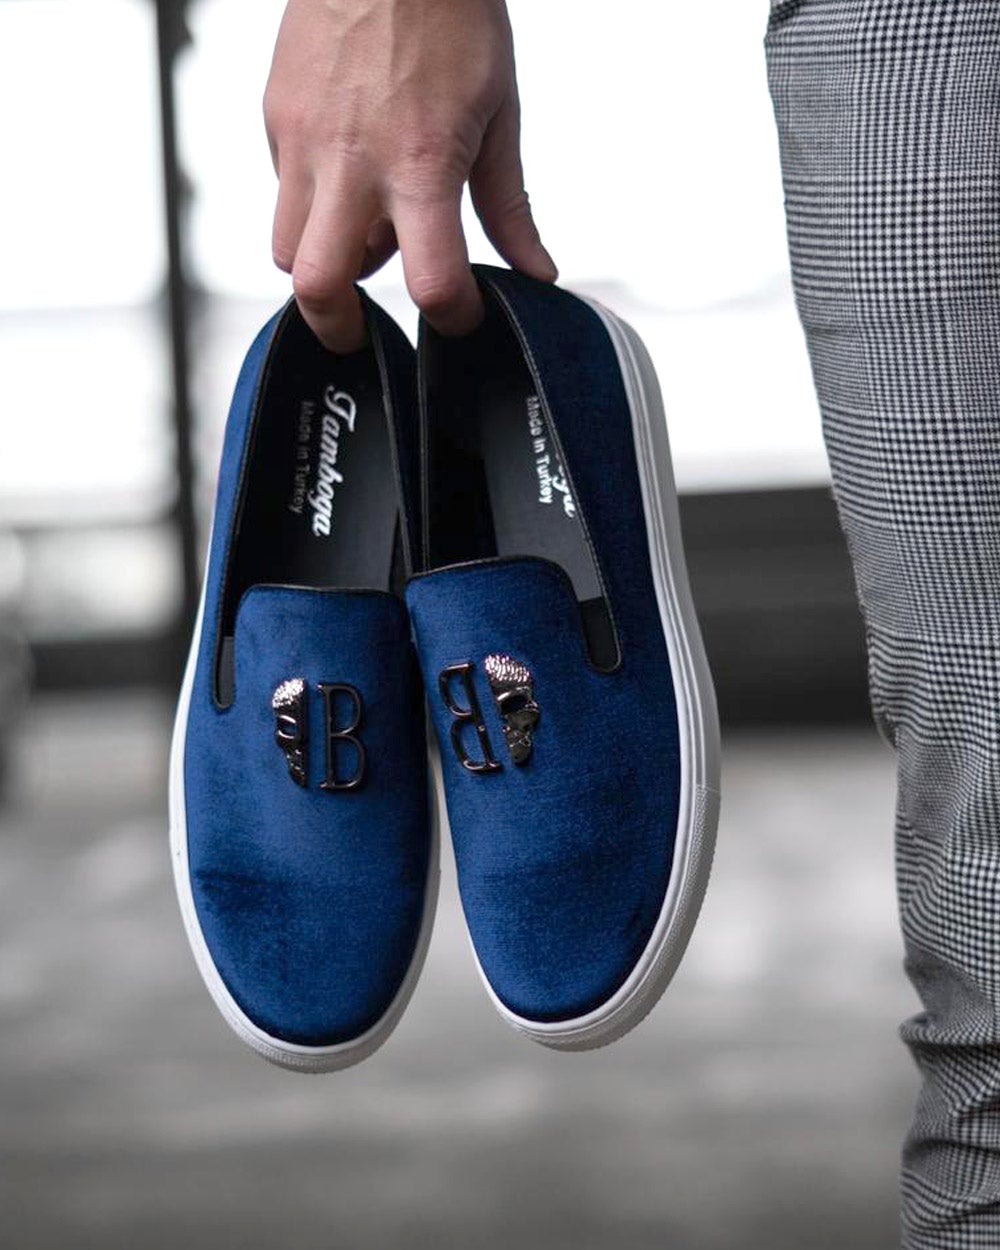 Blue moccasin shoes suede leather look with metal skull and sneaker type sole for men